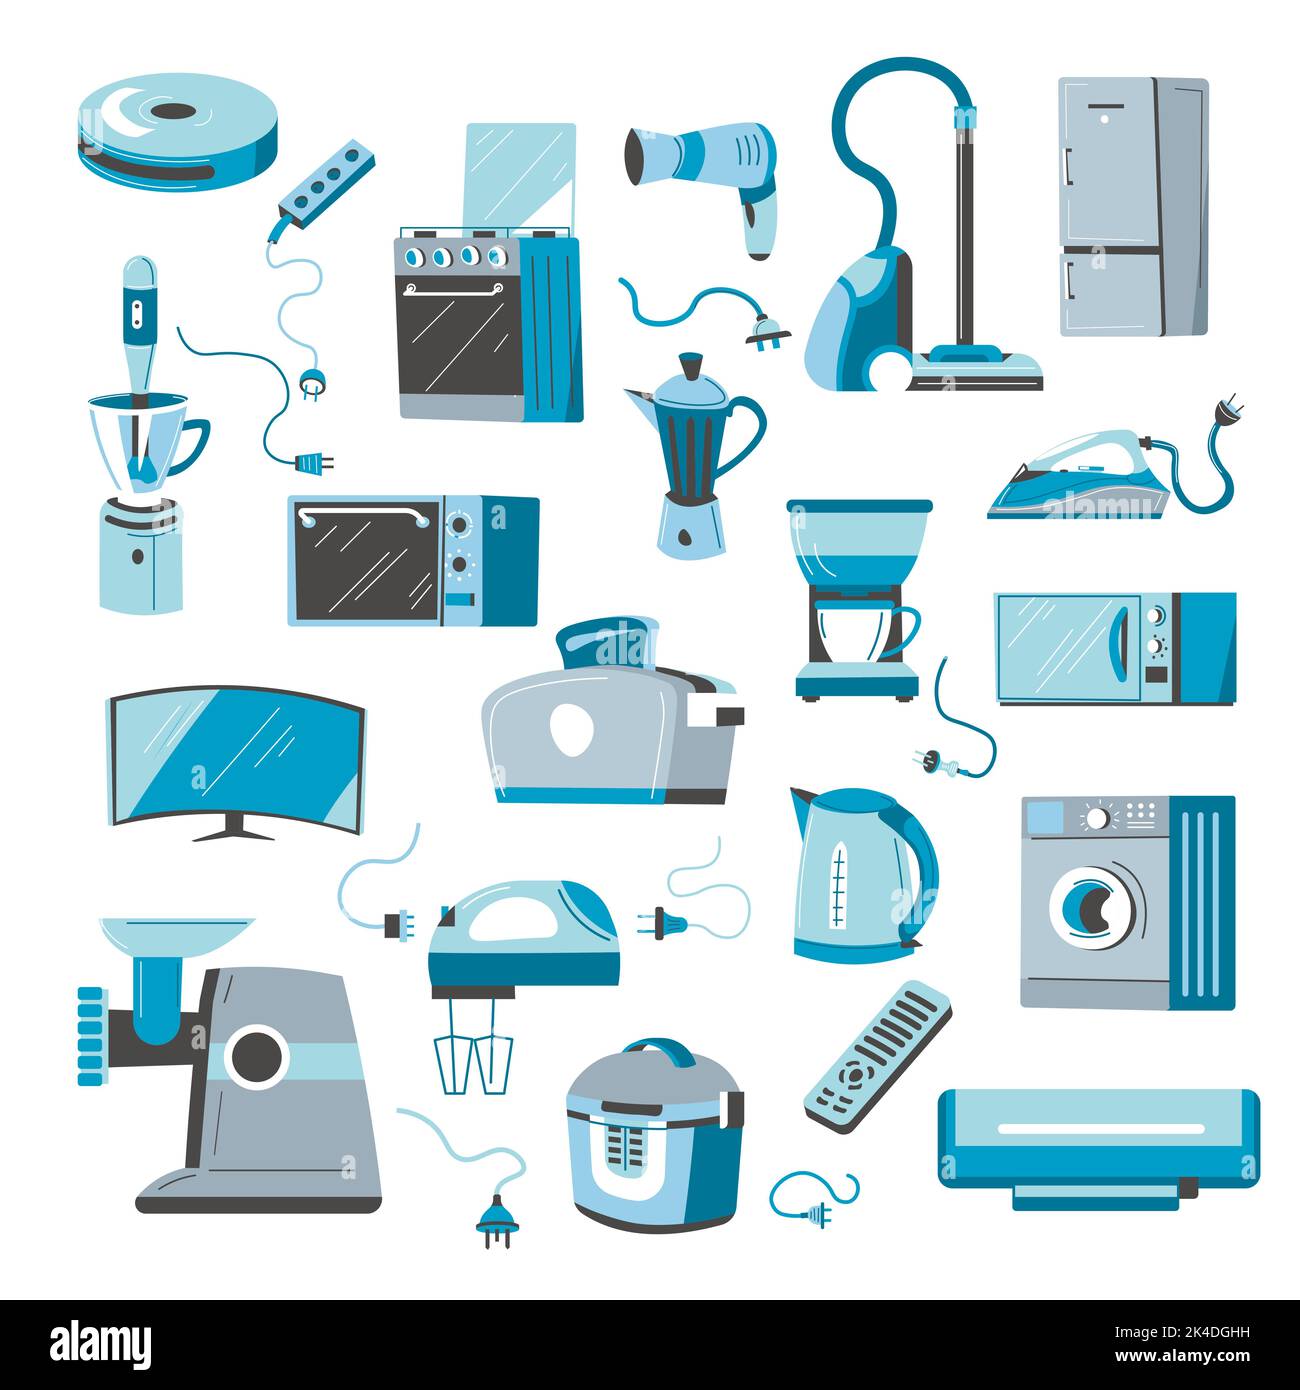 Home appliances for kitchen and bathroom vector Stock Vector